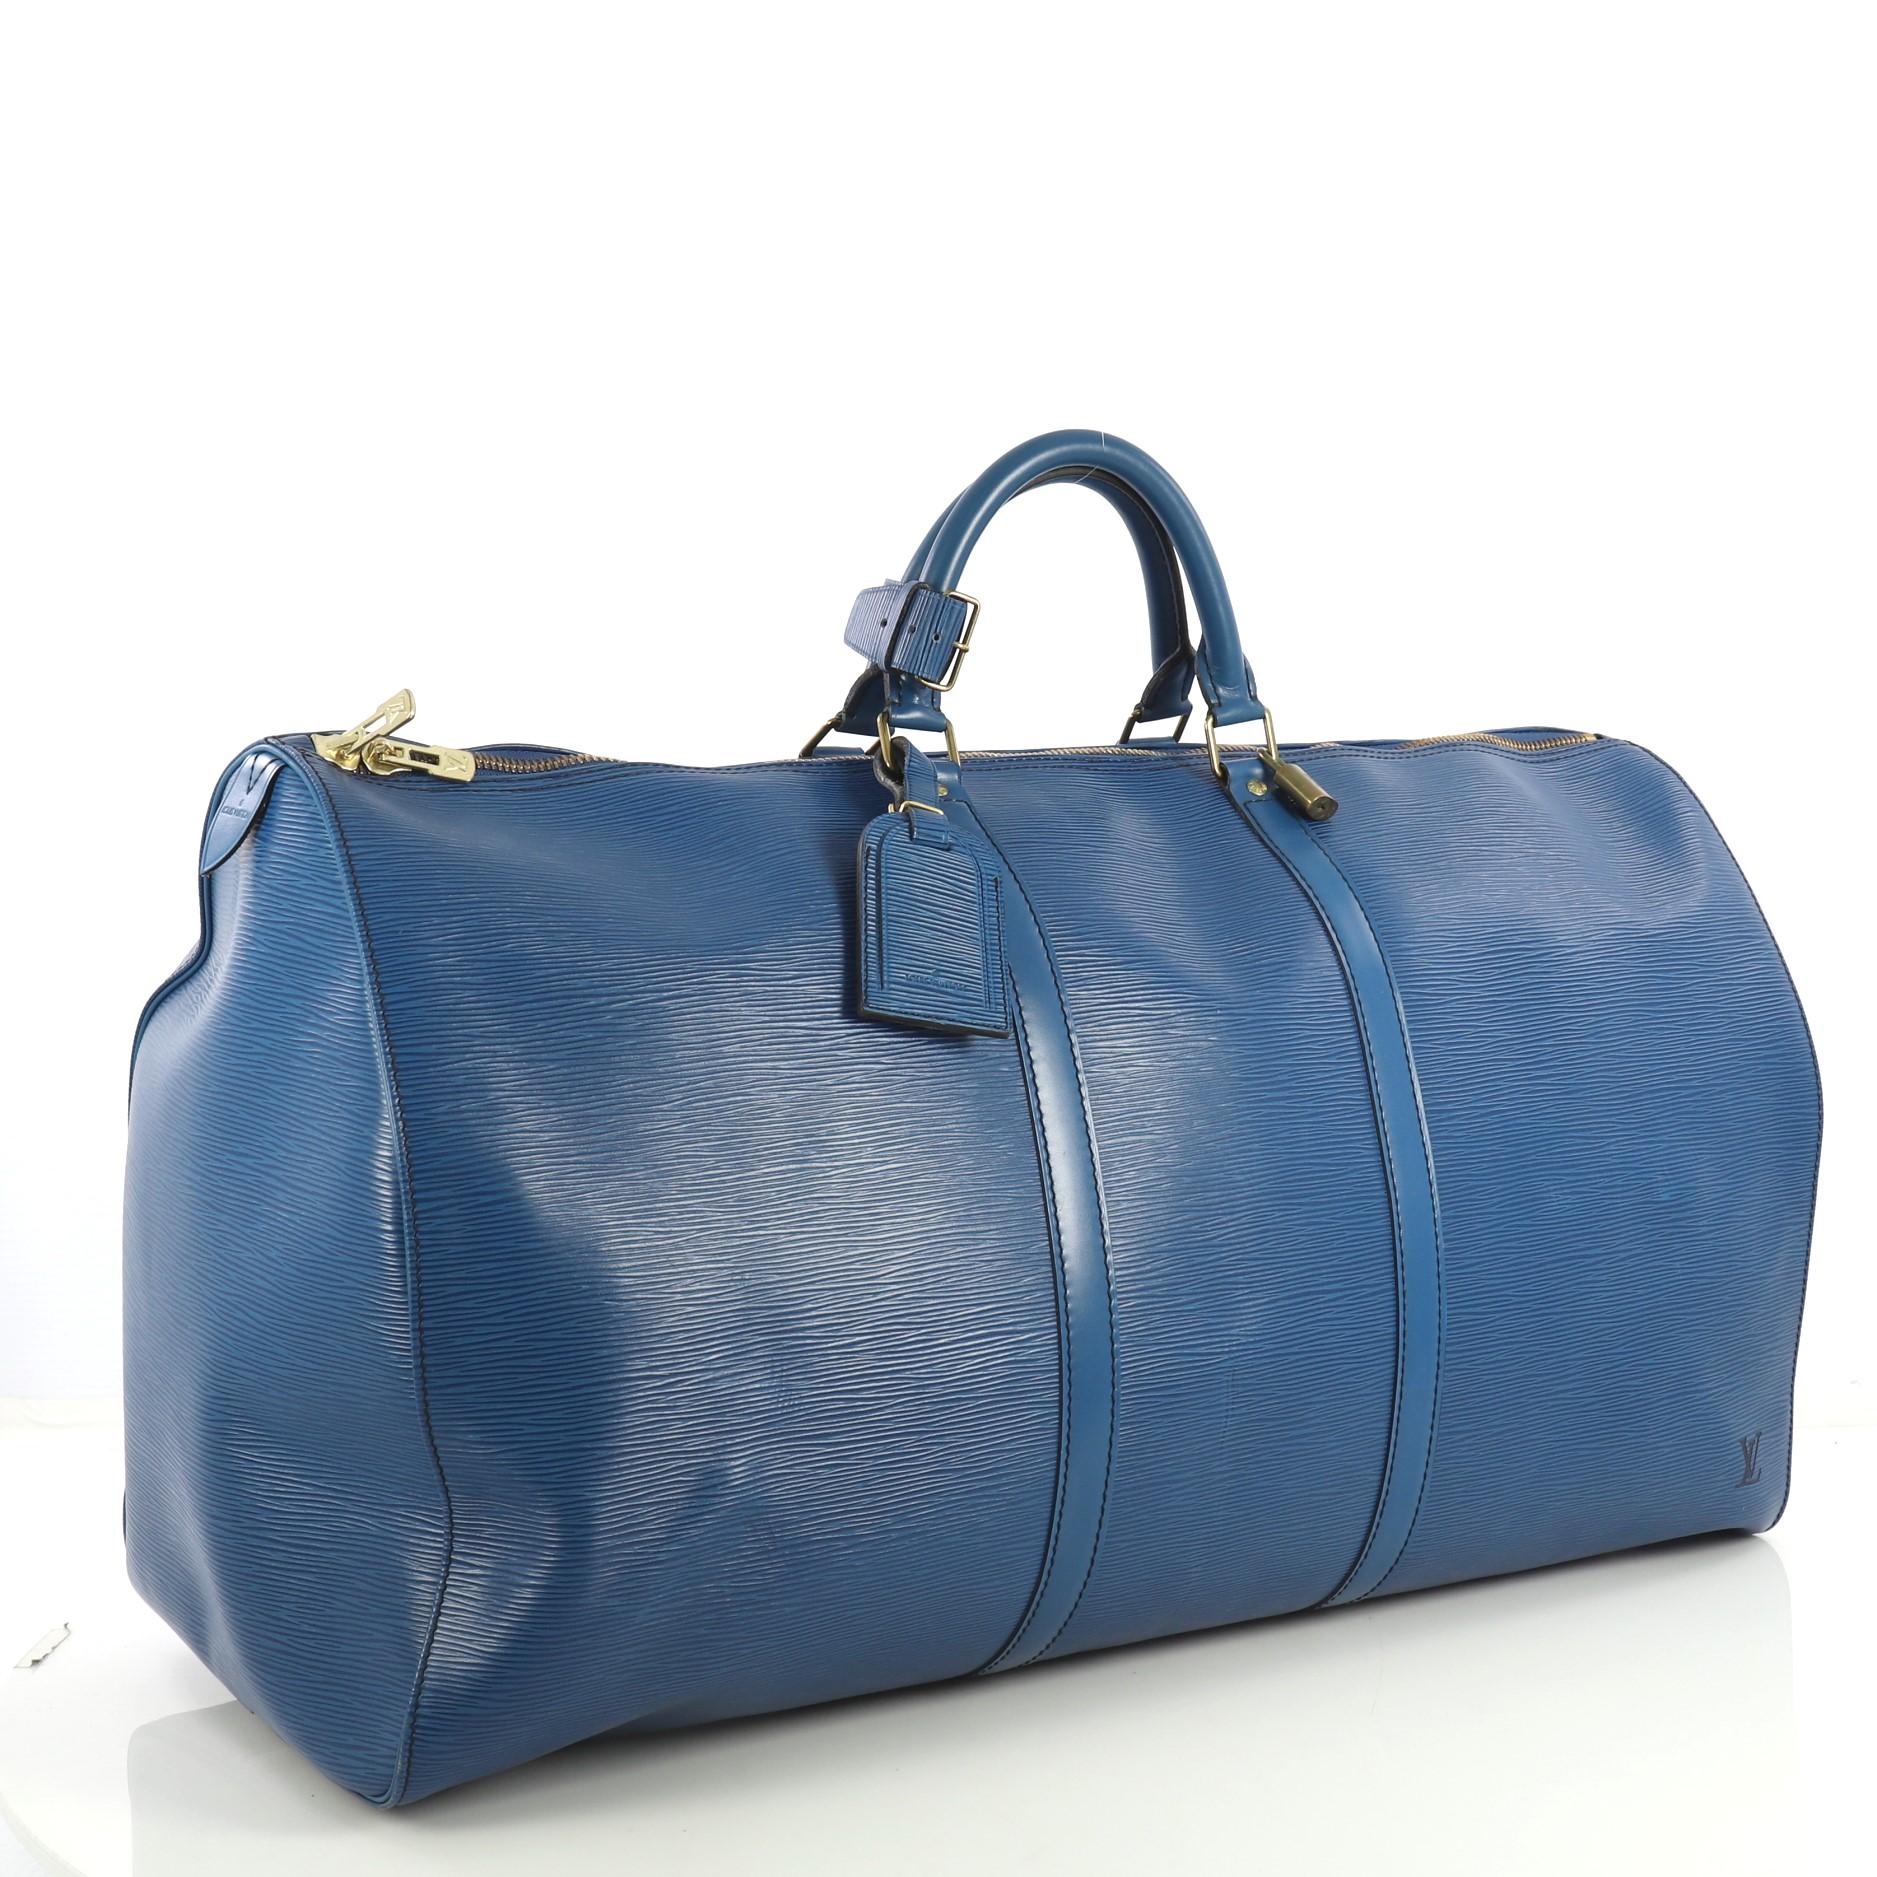 This Louis Vuitton Keepall Bag Epi Leather 60, crafted from blue epi leather, features dual rolled leather handles, subtle LV logo, exterior slip pocket and gold-tone hardware. Its two-way zip closure opens to a blue raw leather interior.